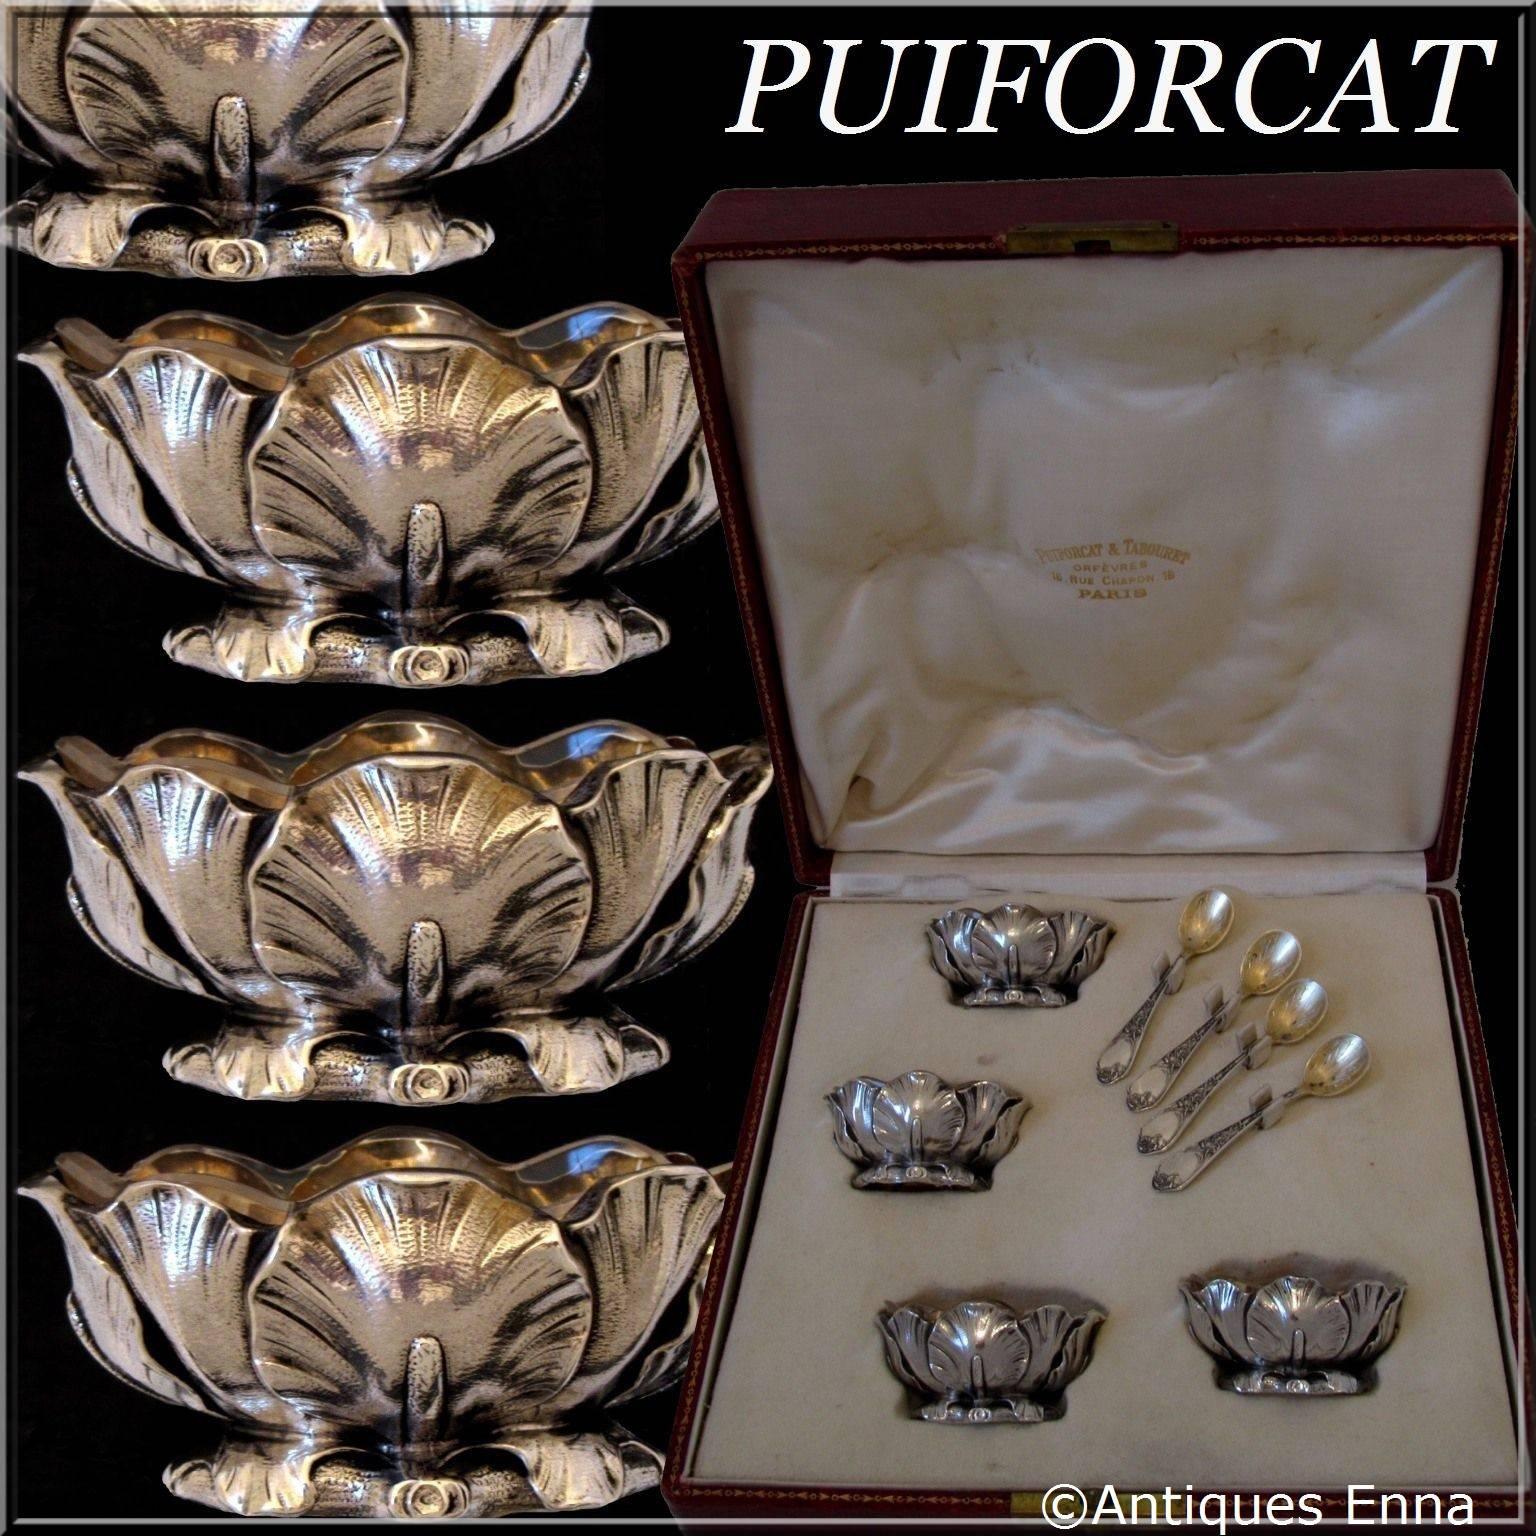 Puiforcat French Sterling Silver Set 4 Salt Cellars original Spoons and Box Iris

Head of Minerve 1 st titre for 950/1000 on salt cellars and spoons for 950/1000 French Sterling Silver Vermeil guarantee.

Fabulous antique 19th century French